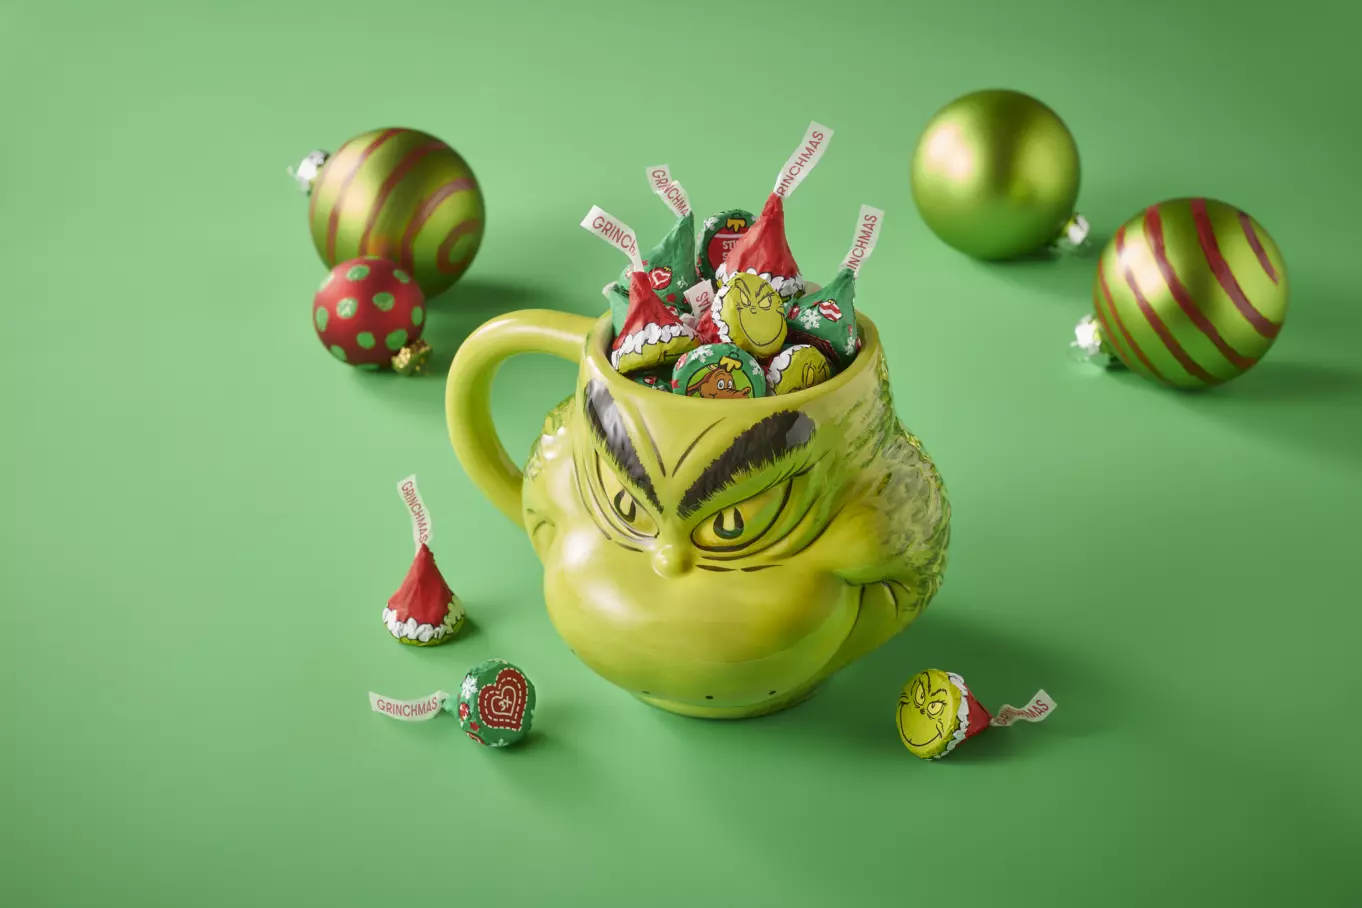 HERSHEY'S KISSES Grinch® Foils Candy inside Grinch themed mug surrounded by ornaments